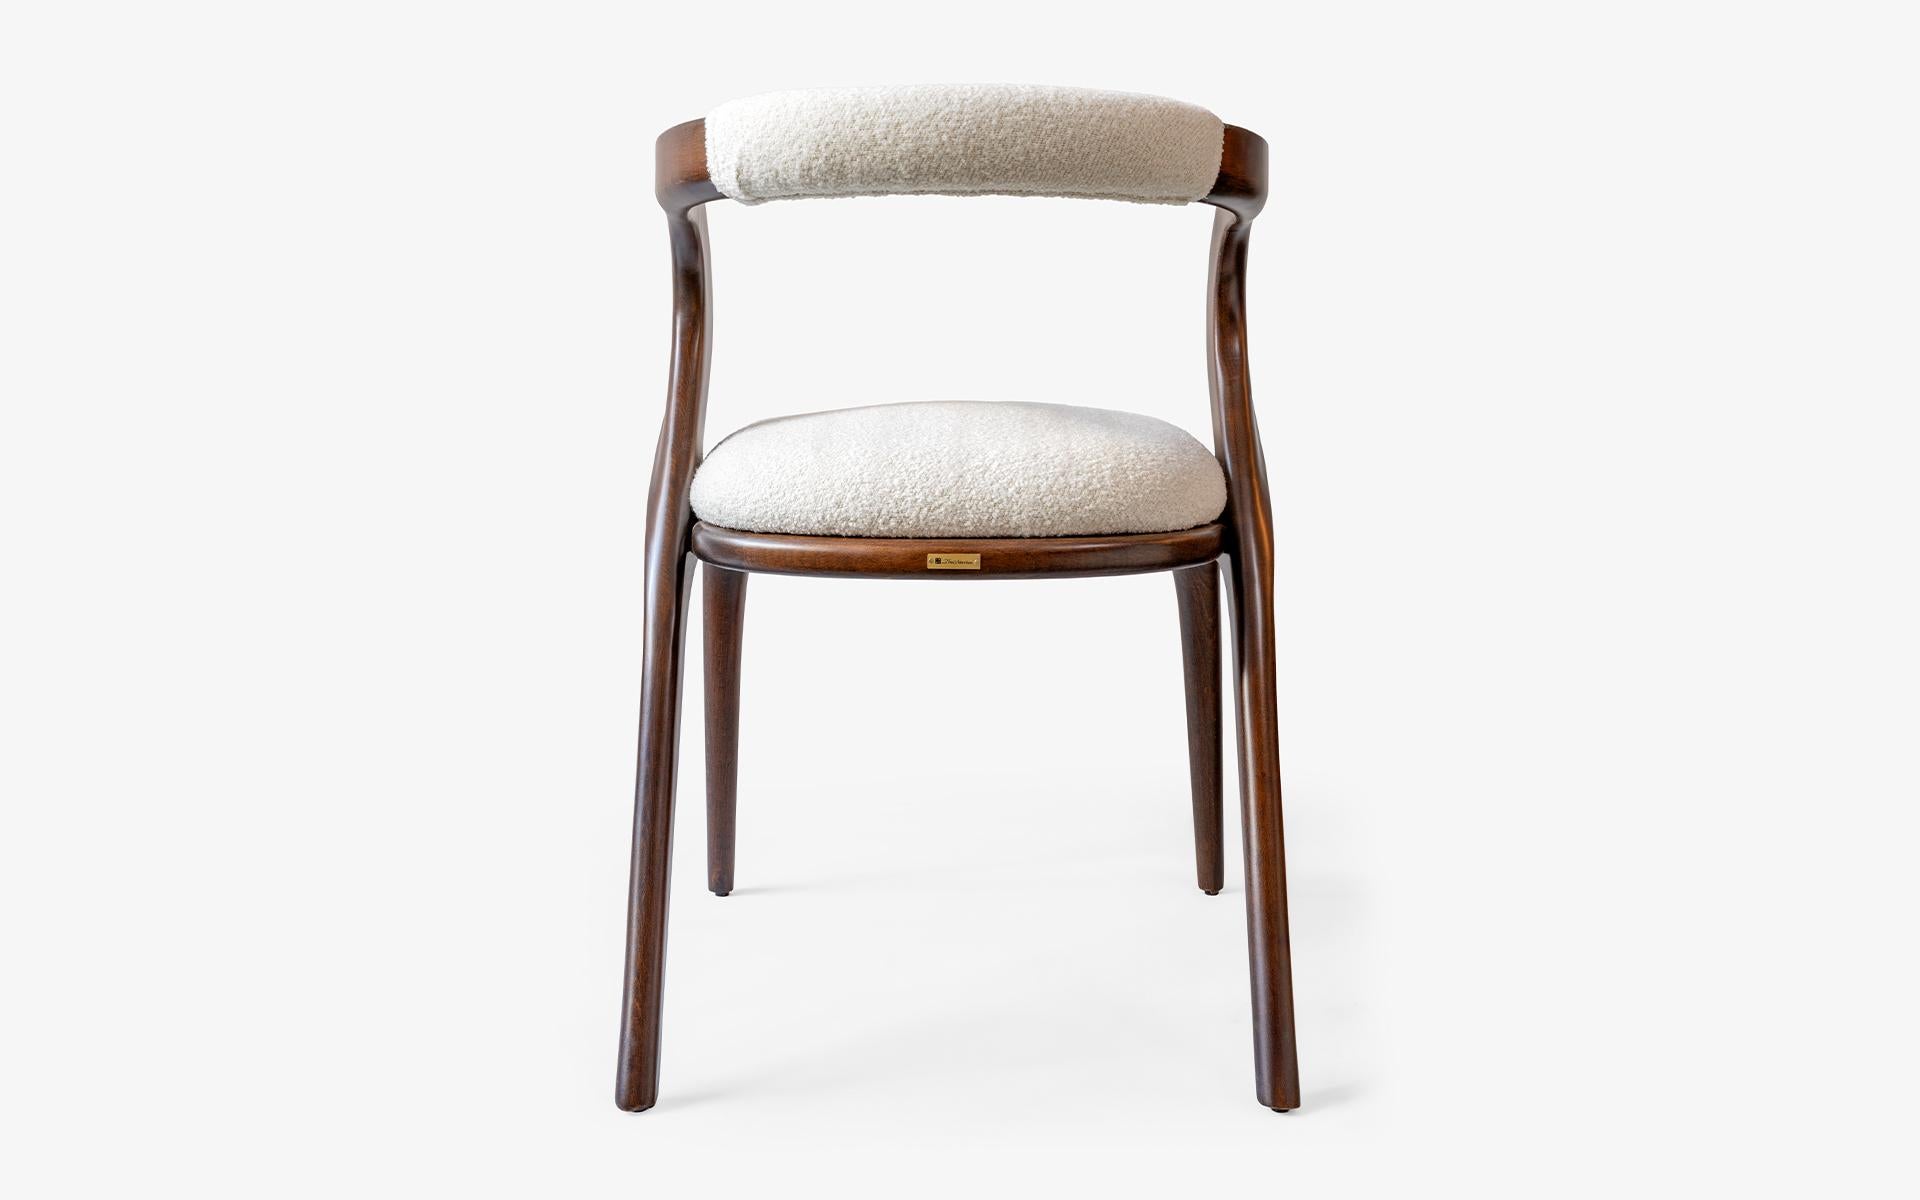 Modern 'Set of 2' Nana Wooden Dining Chair with Back Detail, No:1, Small For Sale